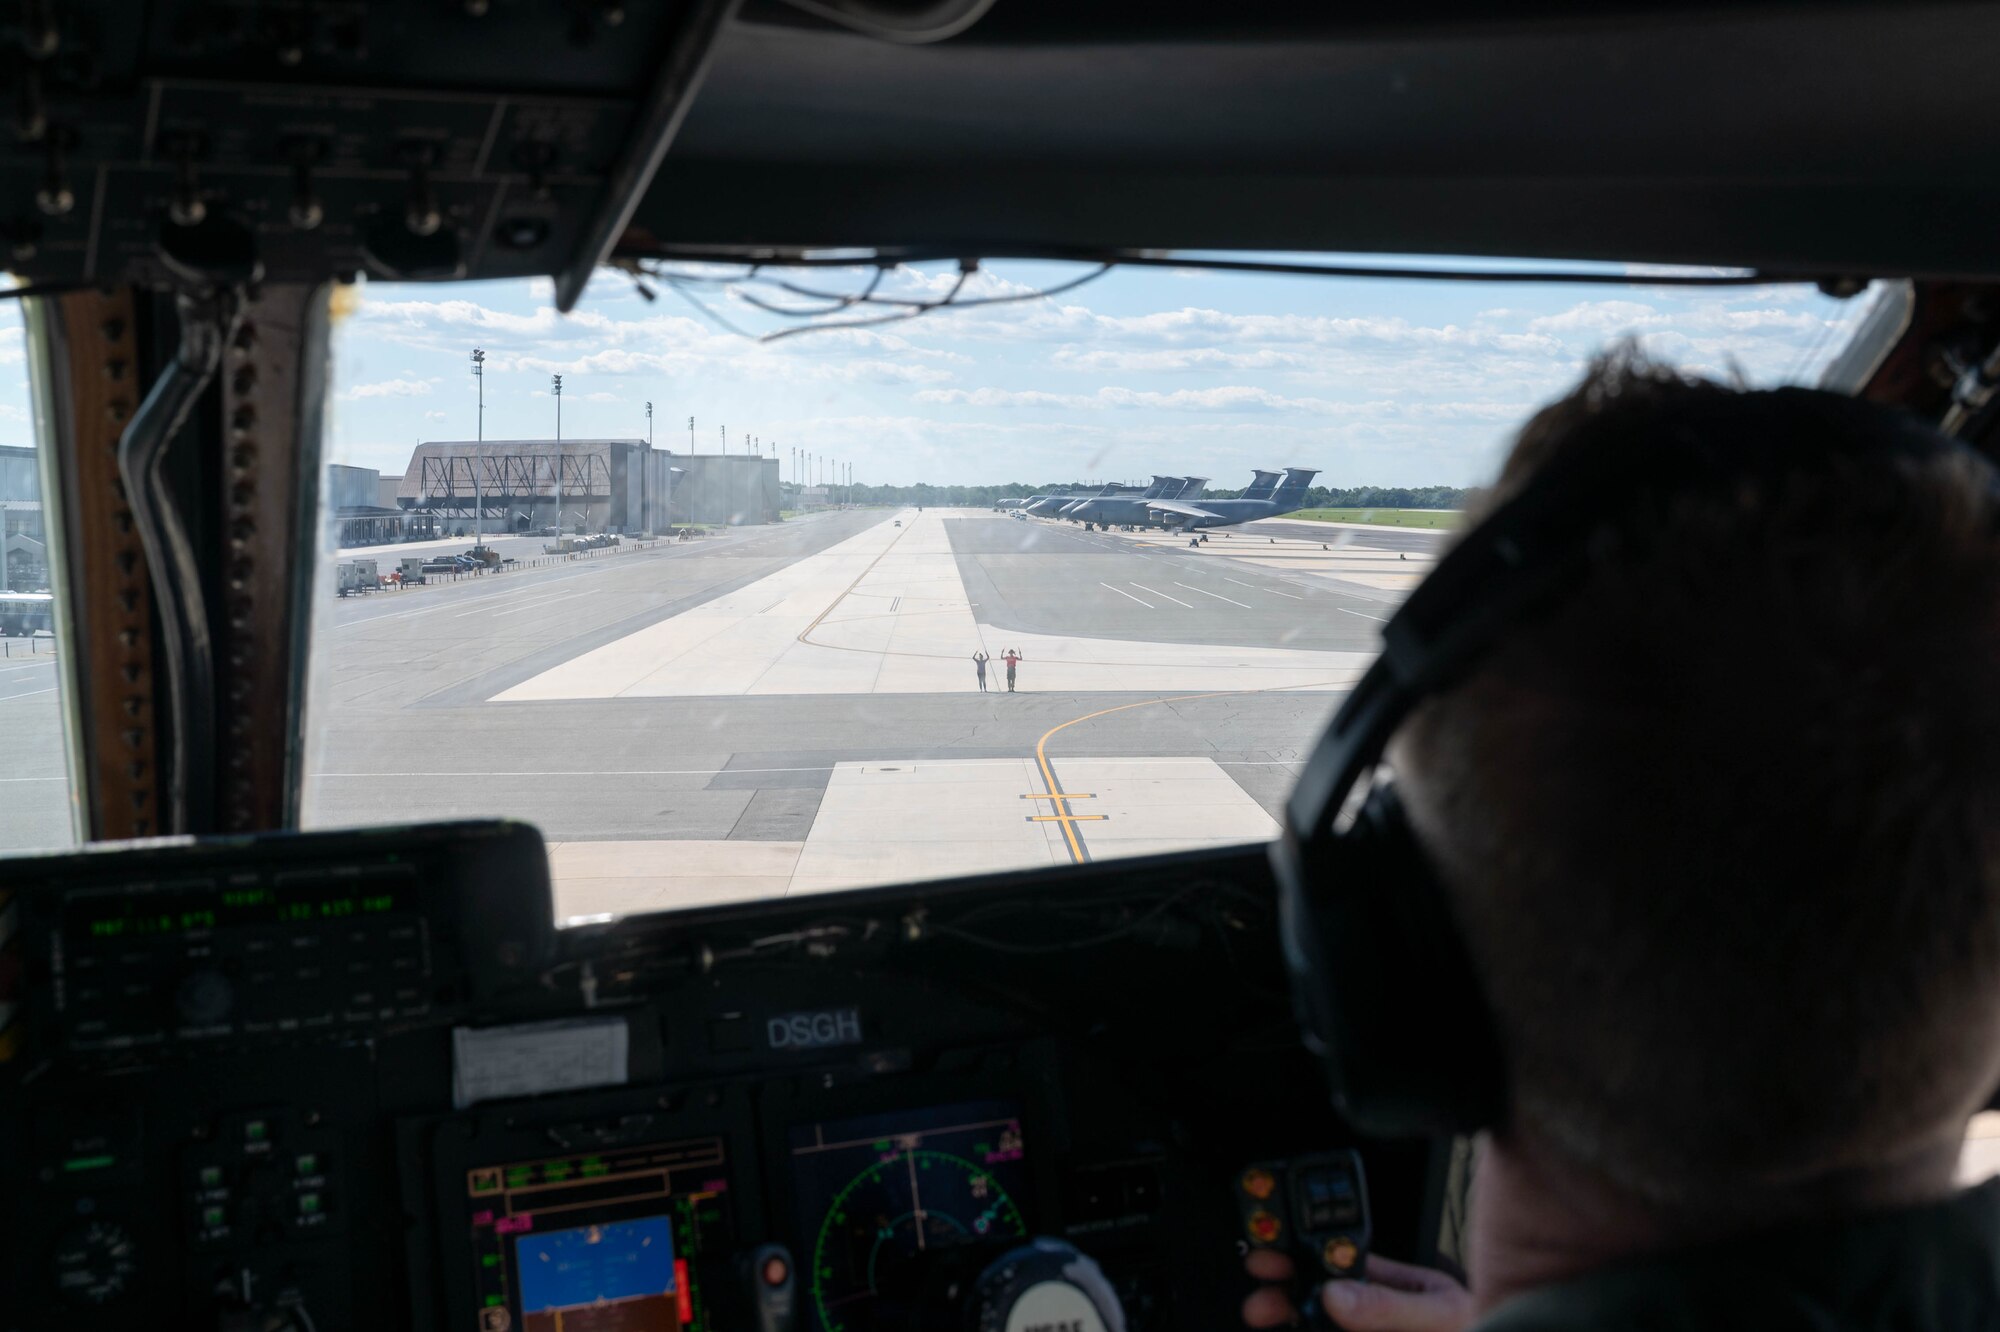 Lt. Col. John Habbestad, 9th Airlift Squadron commander, taxis a C-5M Super Galaxy while being marshalled by his family during his final flight as the 9th AS commander at Dover Air Force Base, Delaware, June 23, 2021. Habbestad served as 9th AS commander for two years. (U.S. Air Force photo by Senior Airman Faith Schaefer)